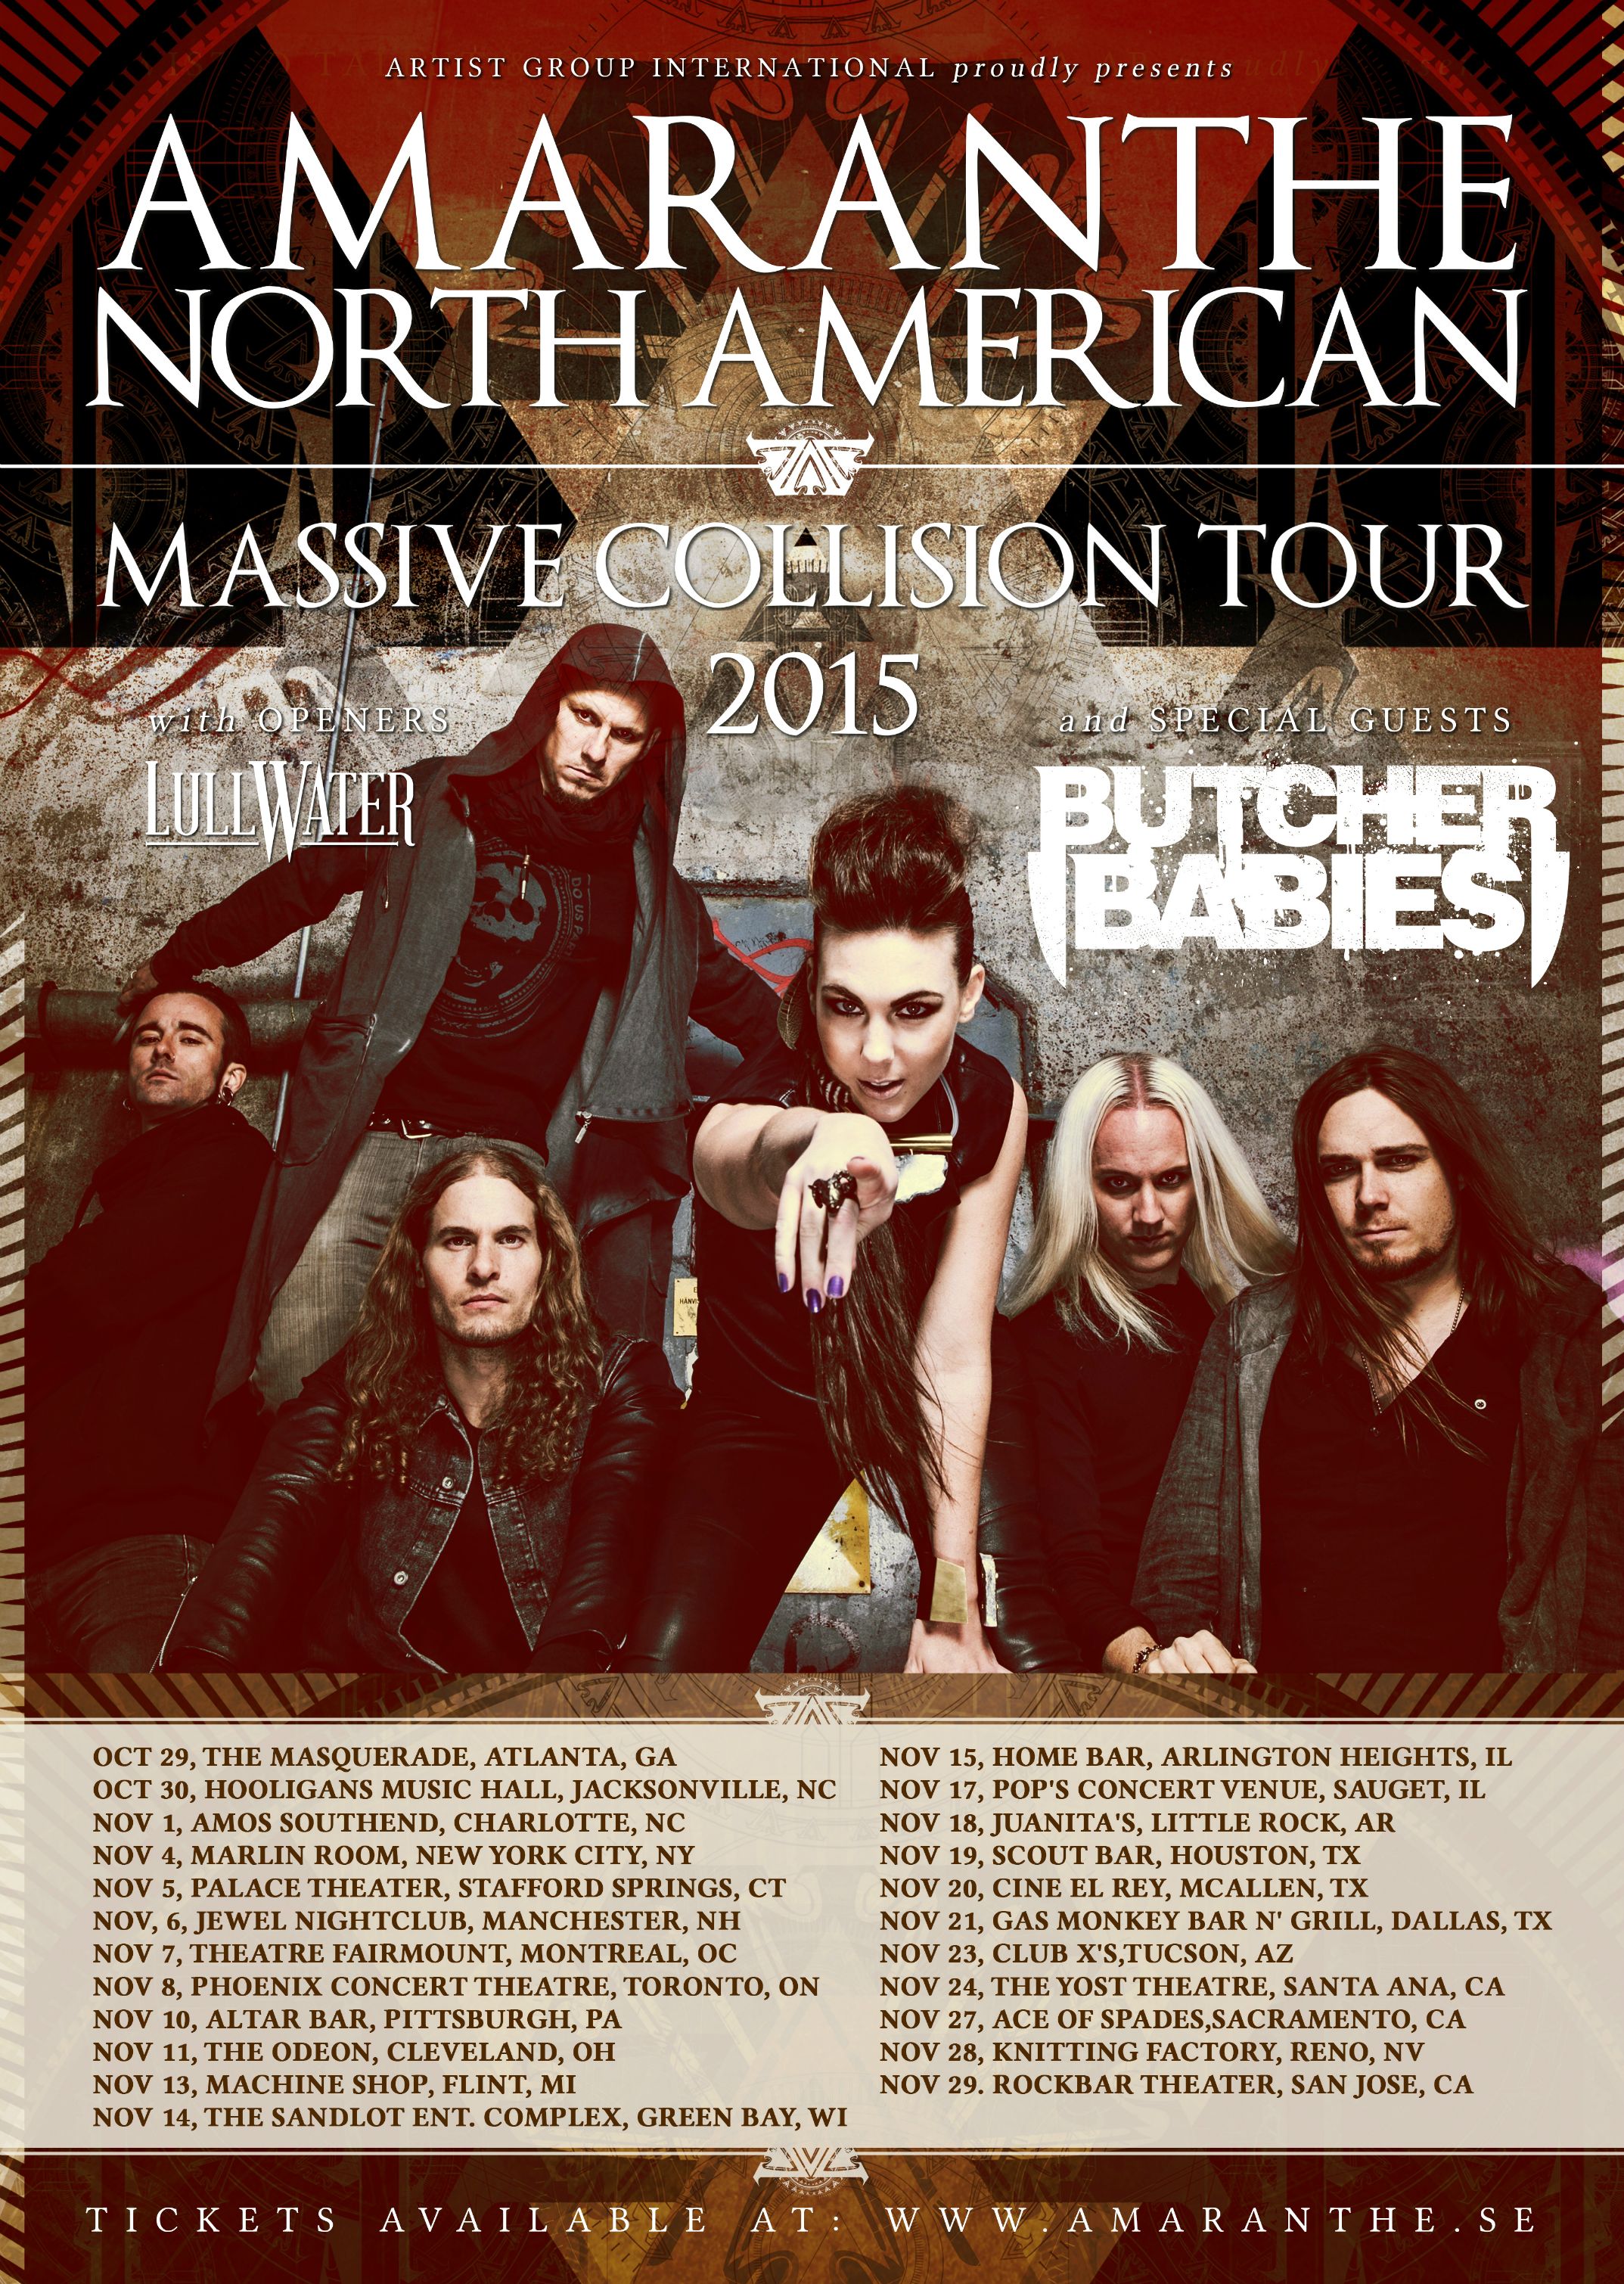 AMARANTHE to Return to North America This Fall